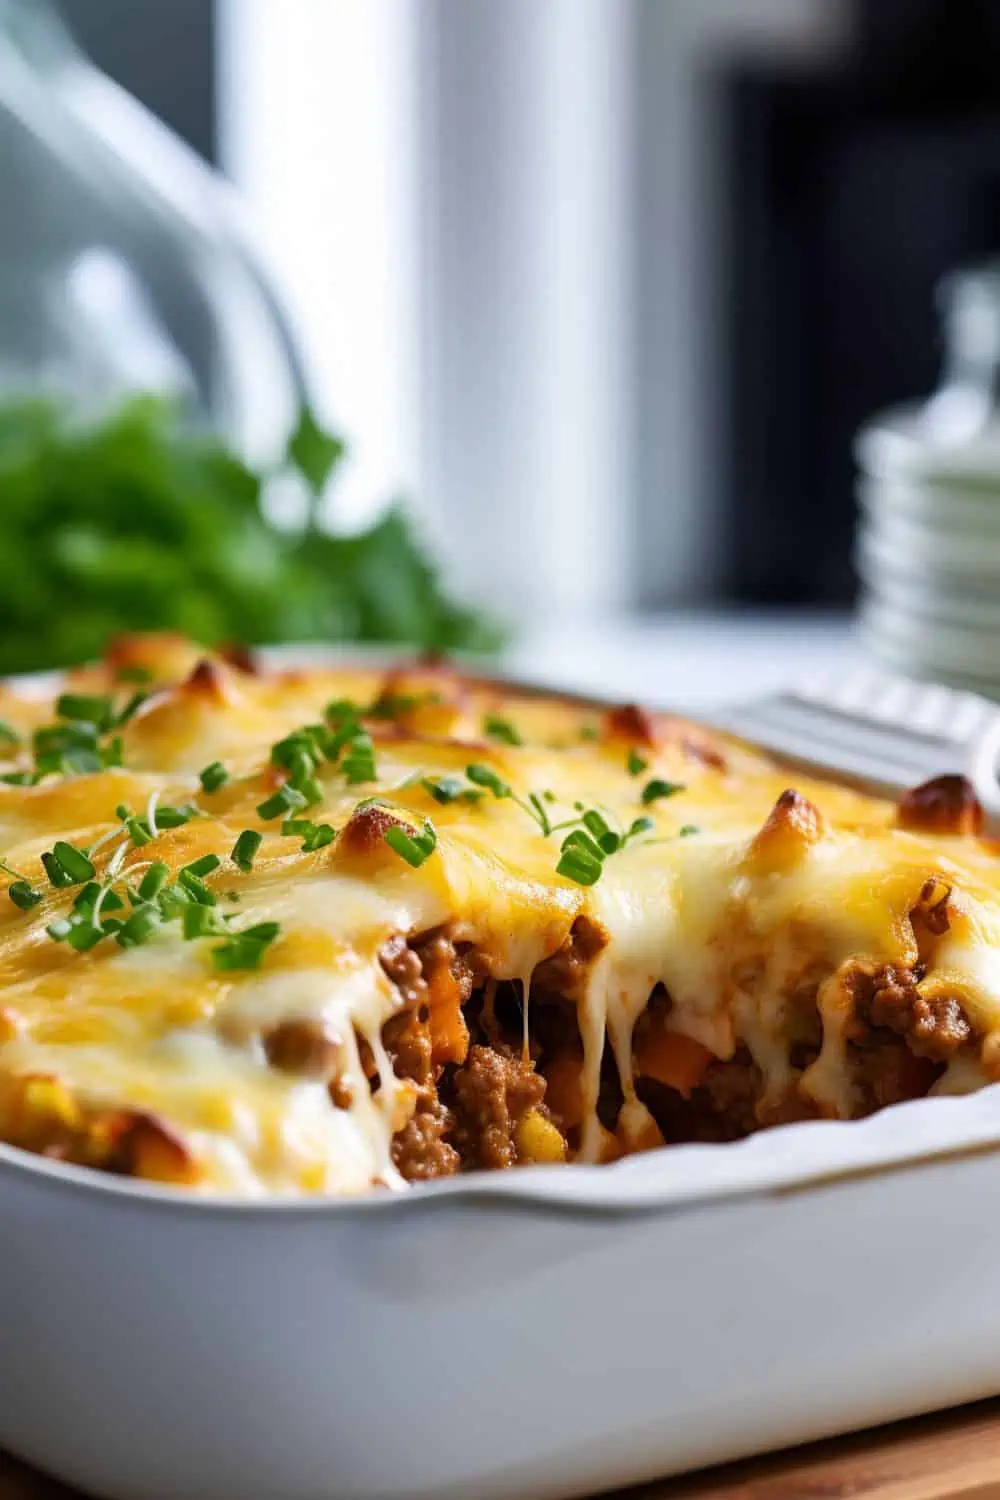 Keto Hamburger Casserole: A delicious low-carb dinner option which is one of the best keto ground beef recipes.
